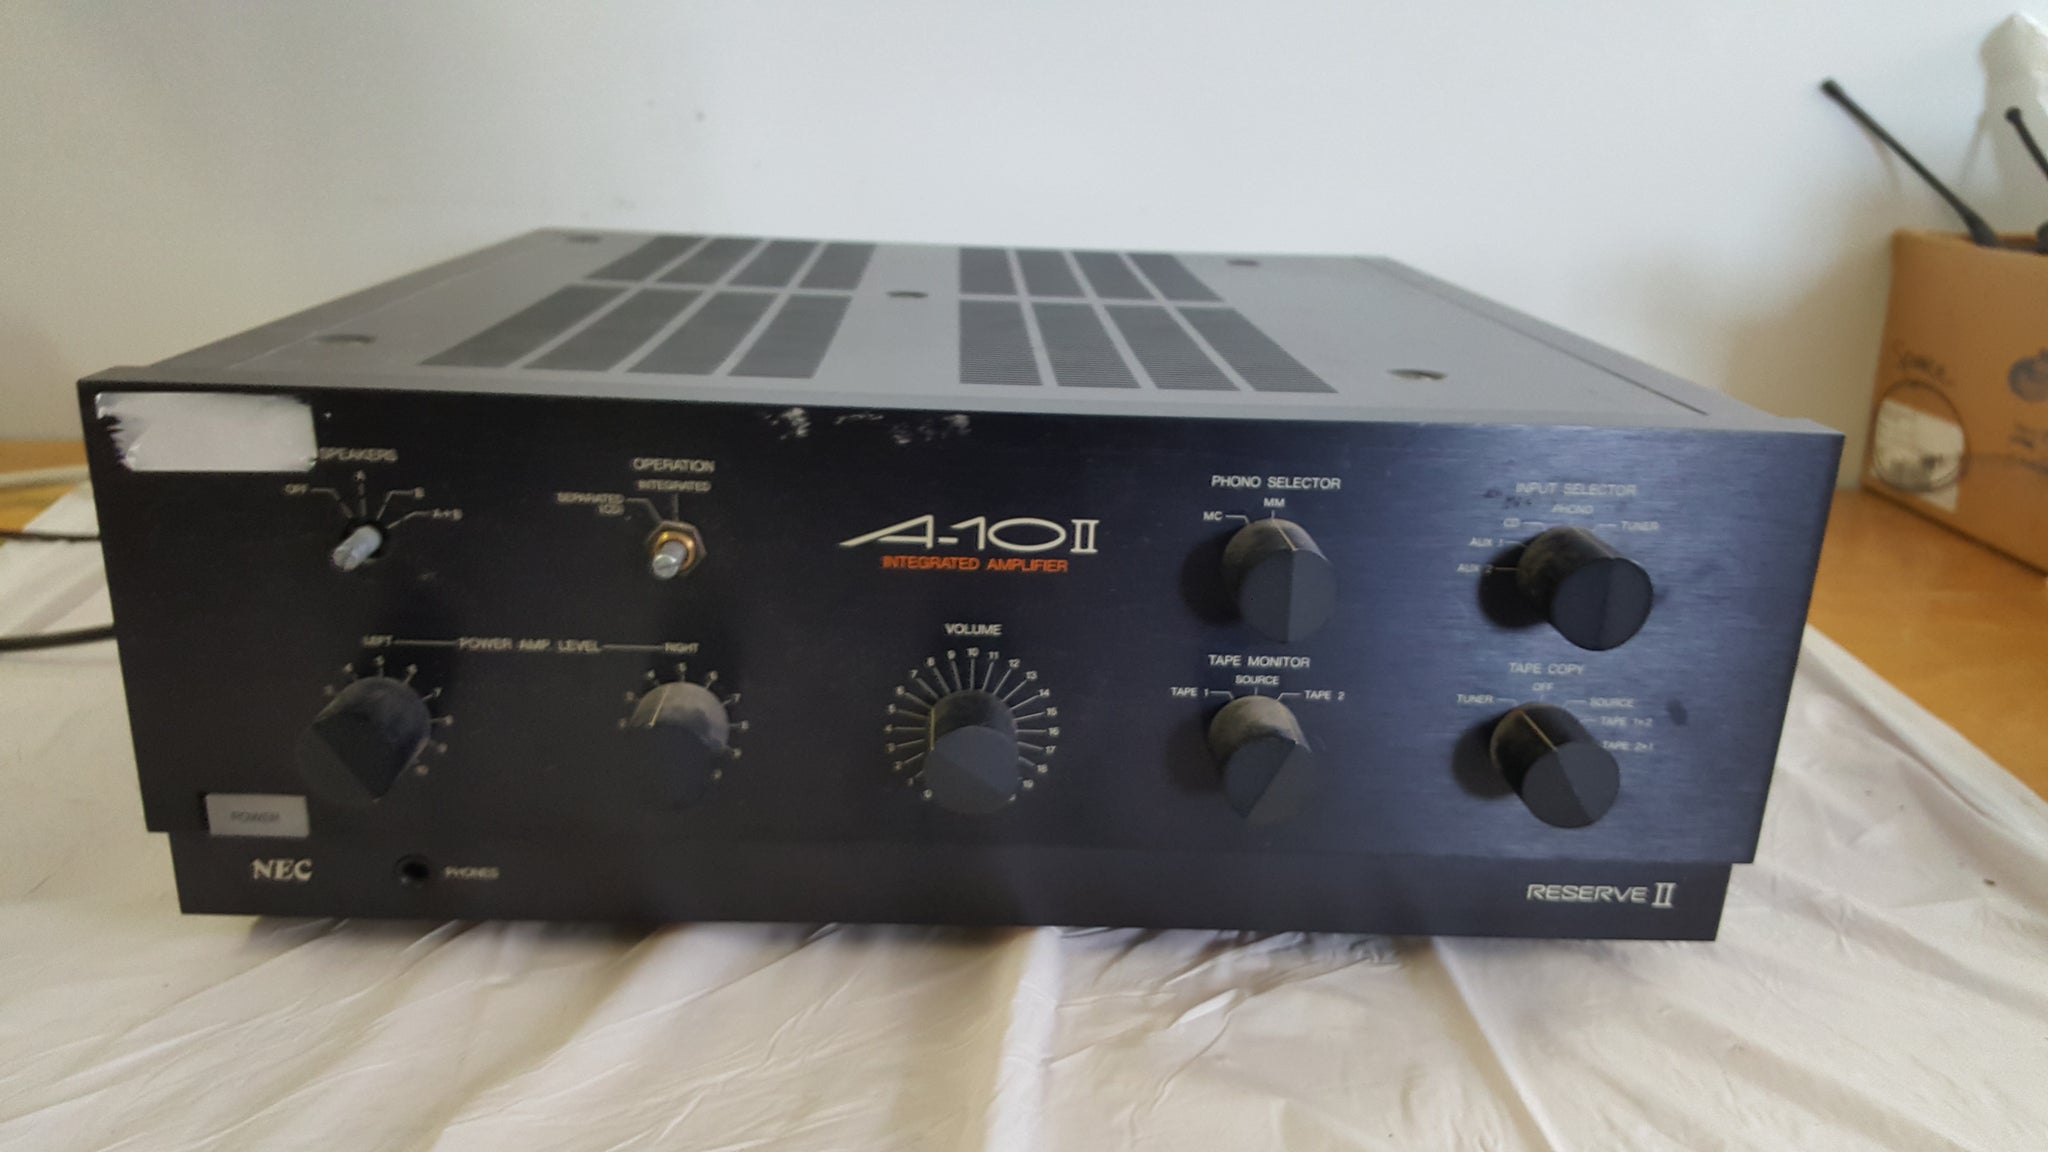 NEC A-10 II Integrated Amplifier Reserve II - 2 missing knobs